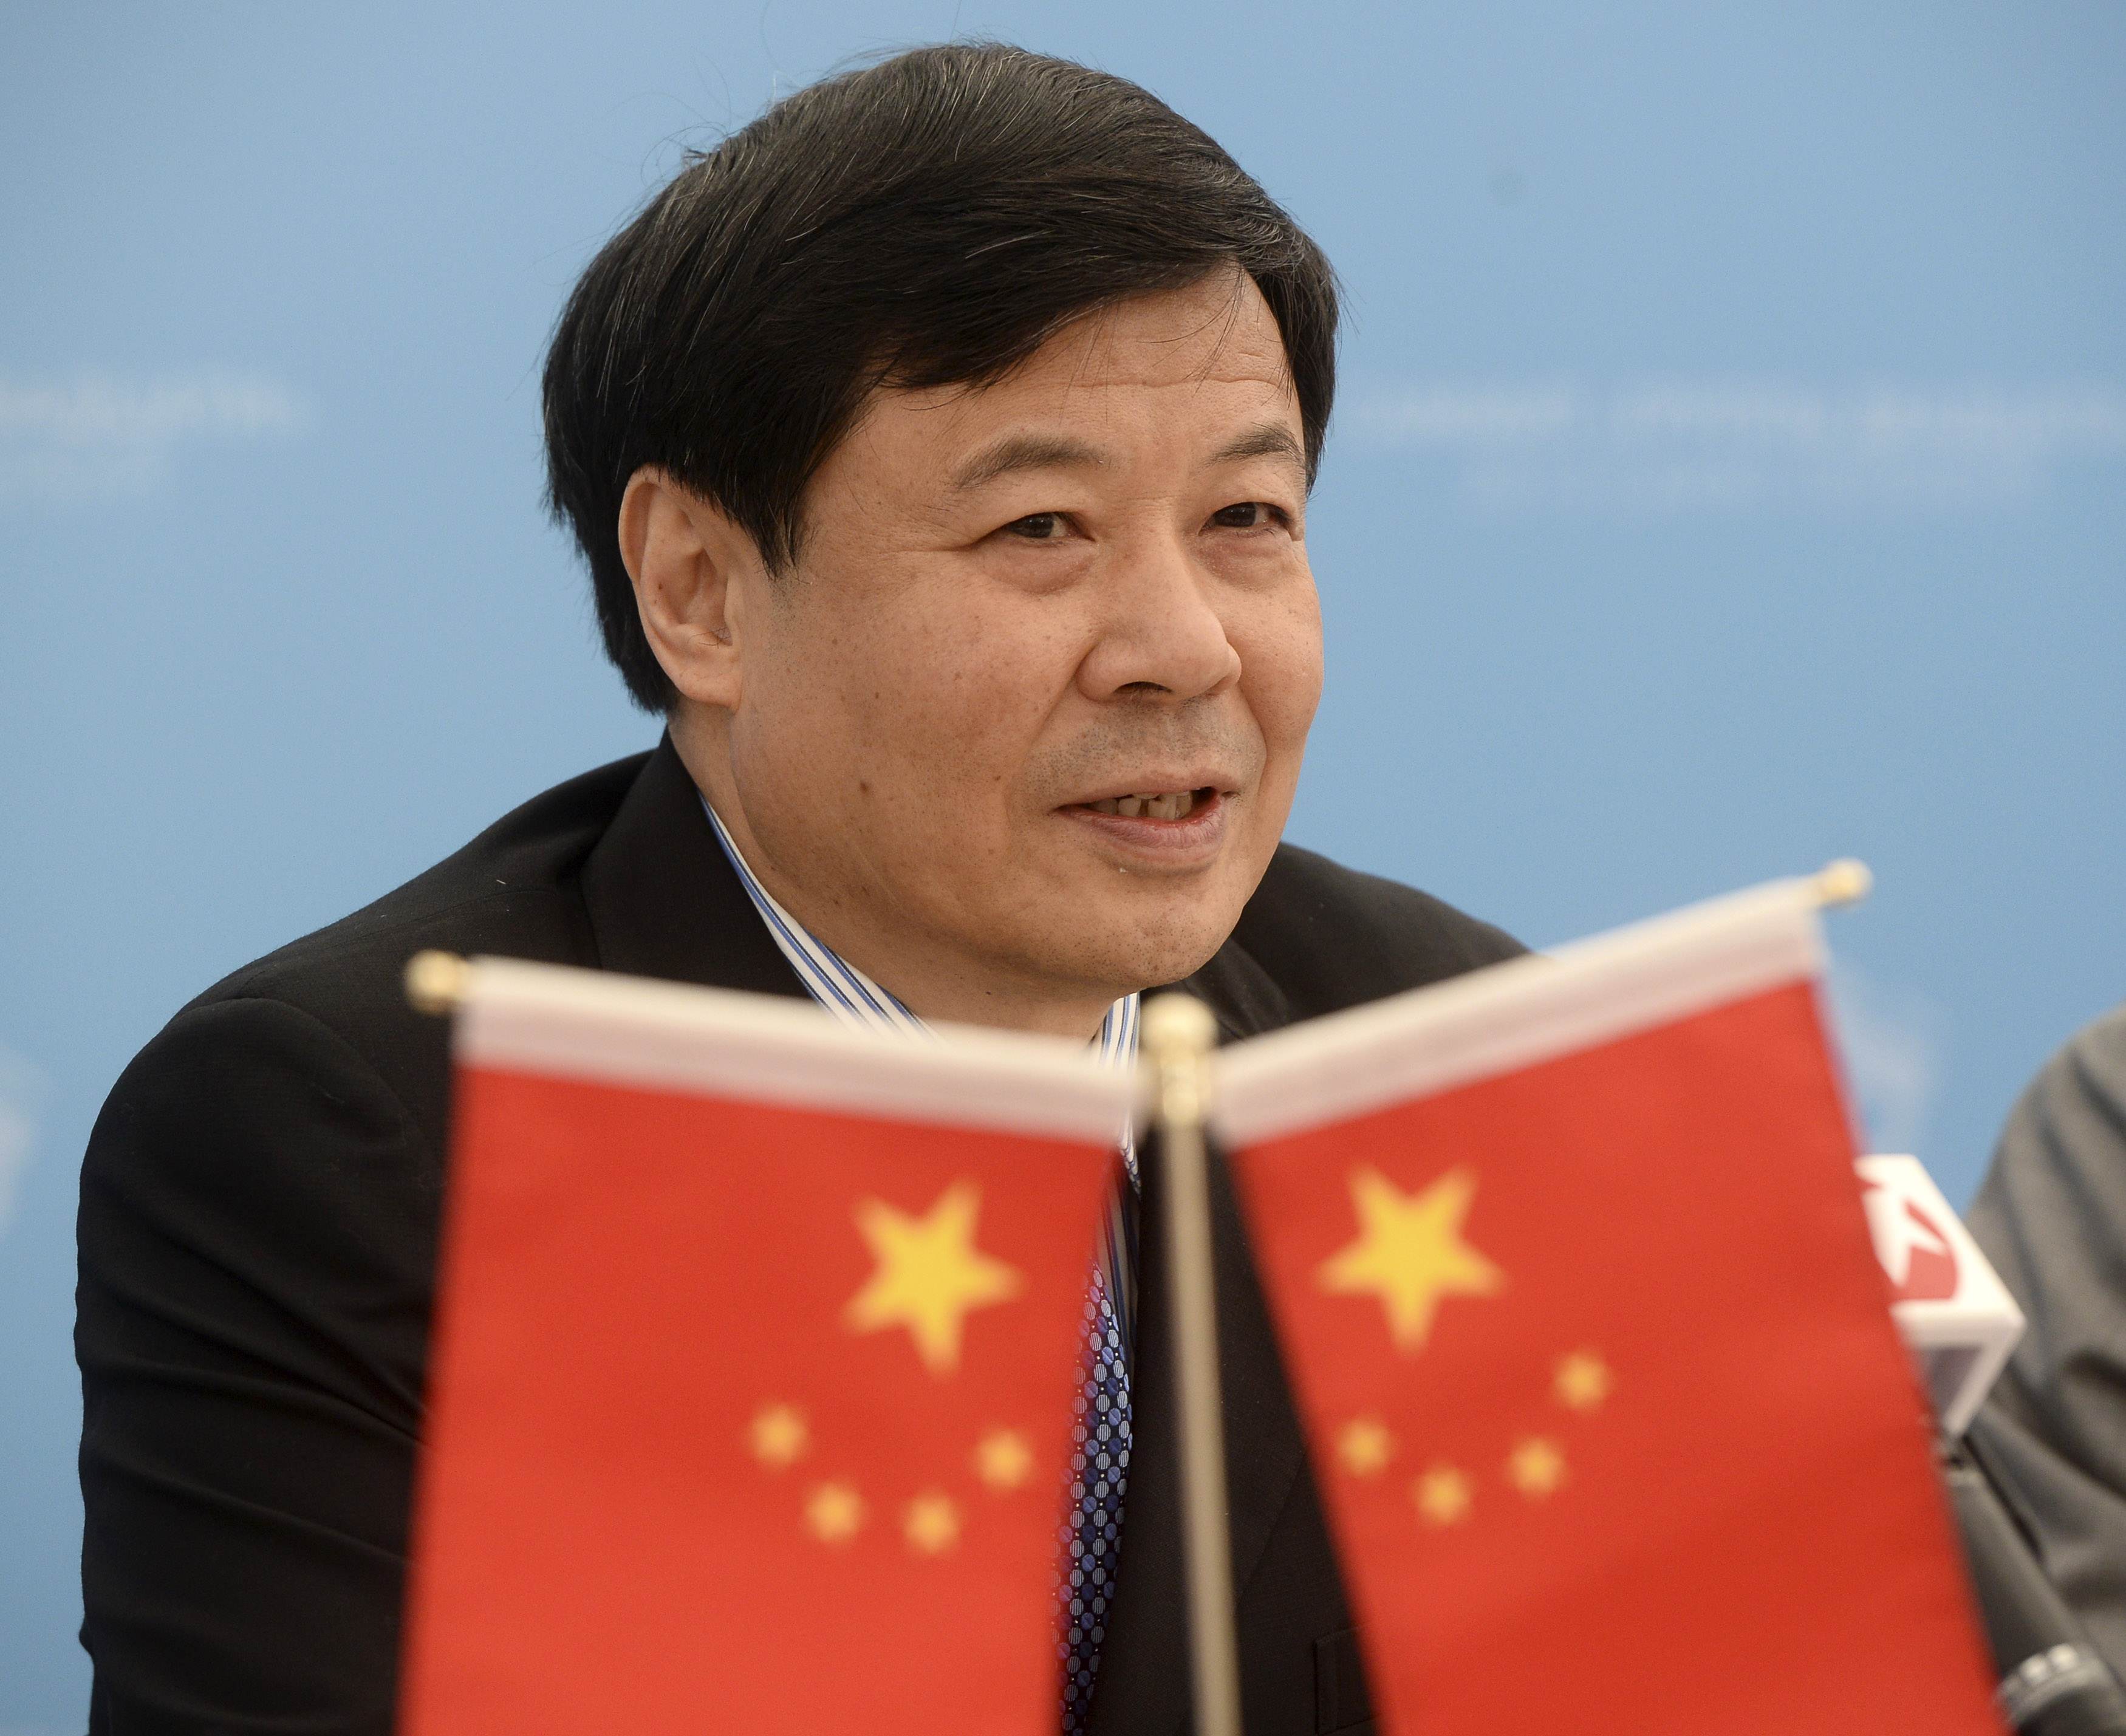 Chinese minister Zhu Guangyao said Fed's tapering was a sign of US economy stabilising but cautioned the "ultra-low" interest rate's impact on macro economy. Photo: Reuters